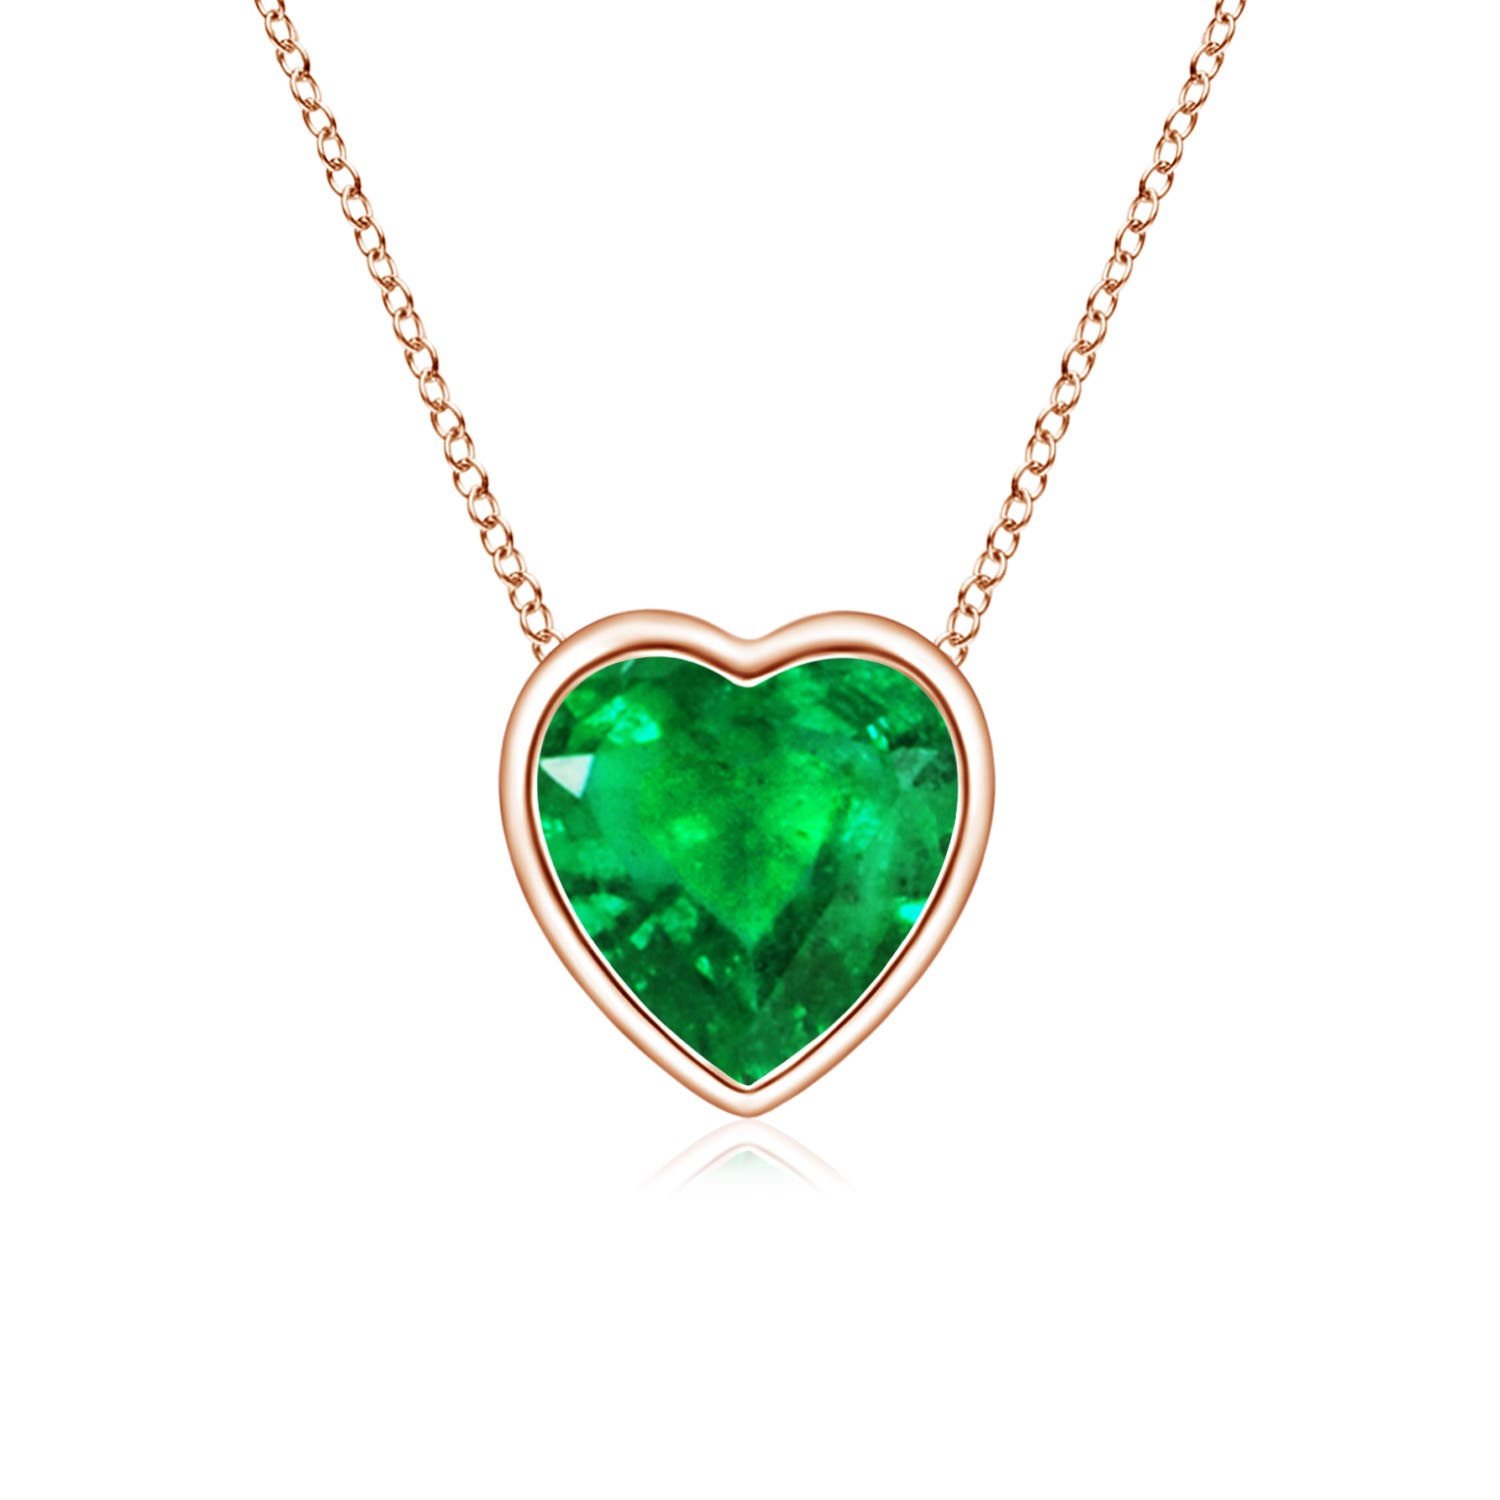 AAA - Emerald / 0.4 CT / 14 KT Rose Gold